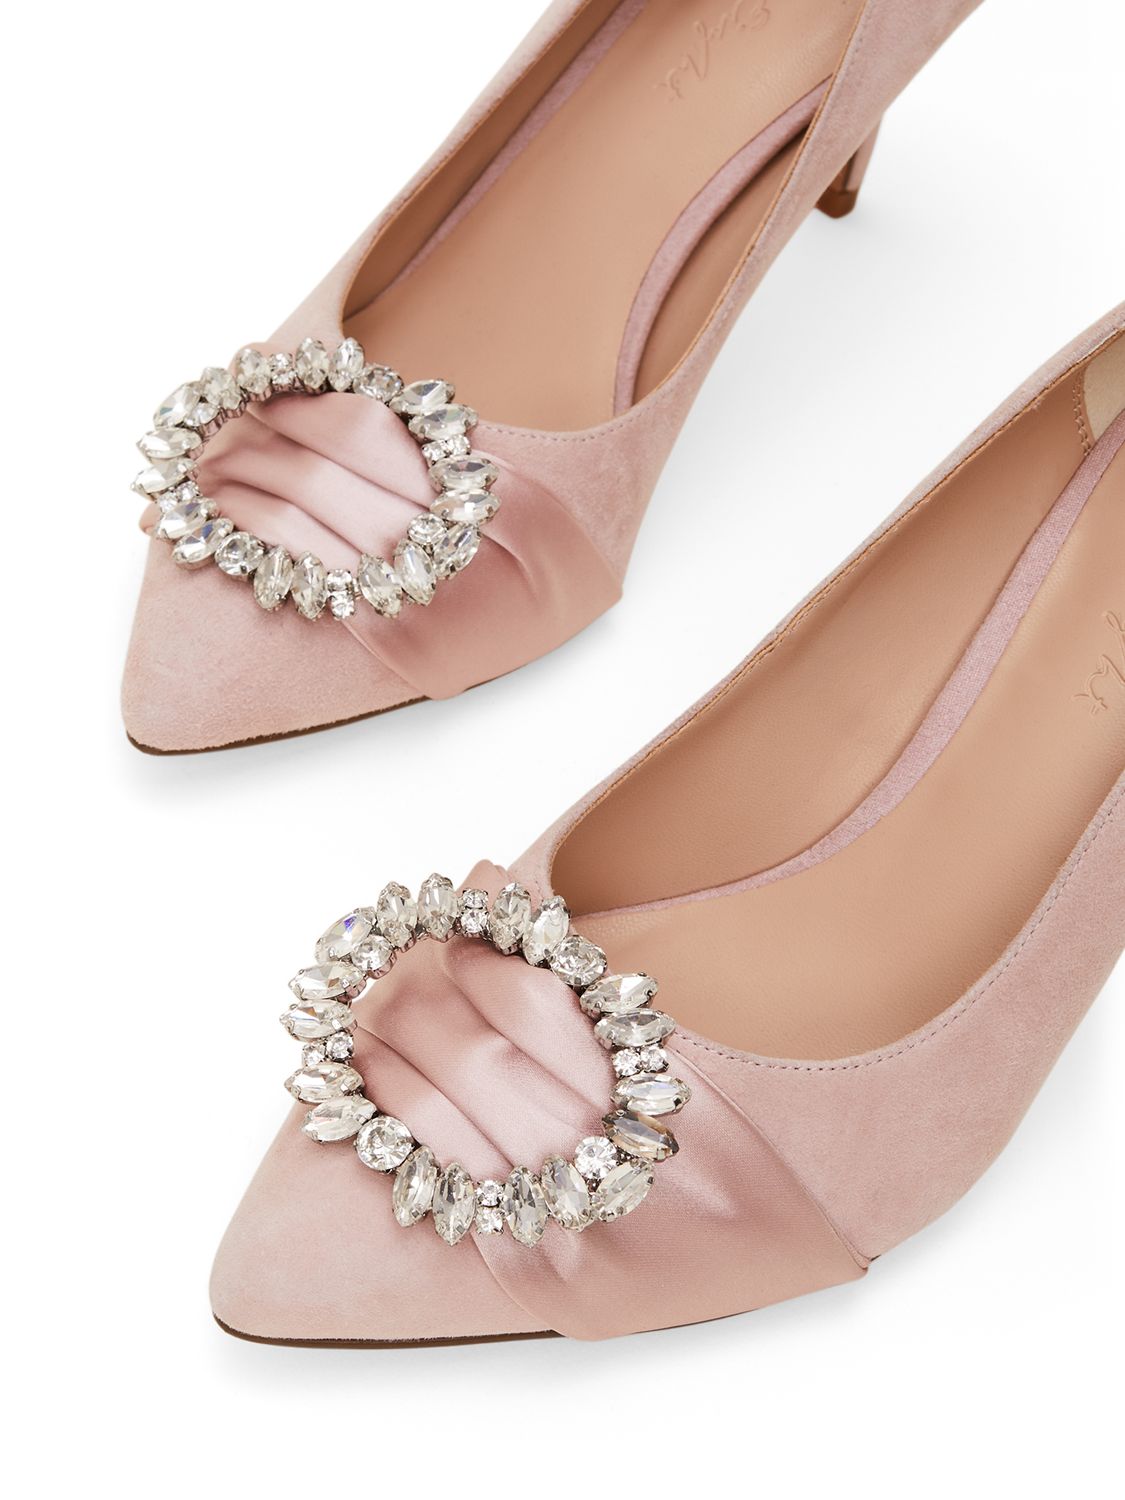 Phase Eight Jewel Ribbon Suede Court Shoes, Antique Rose, 3